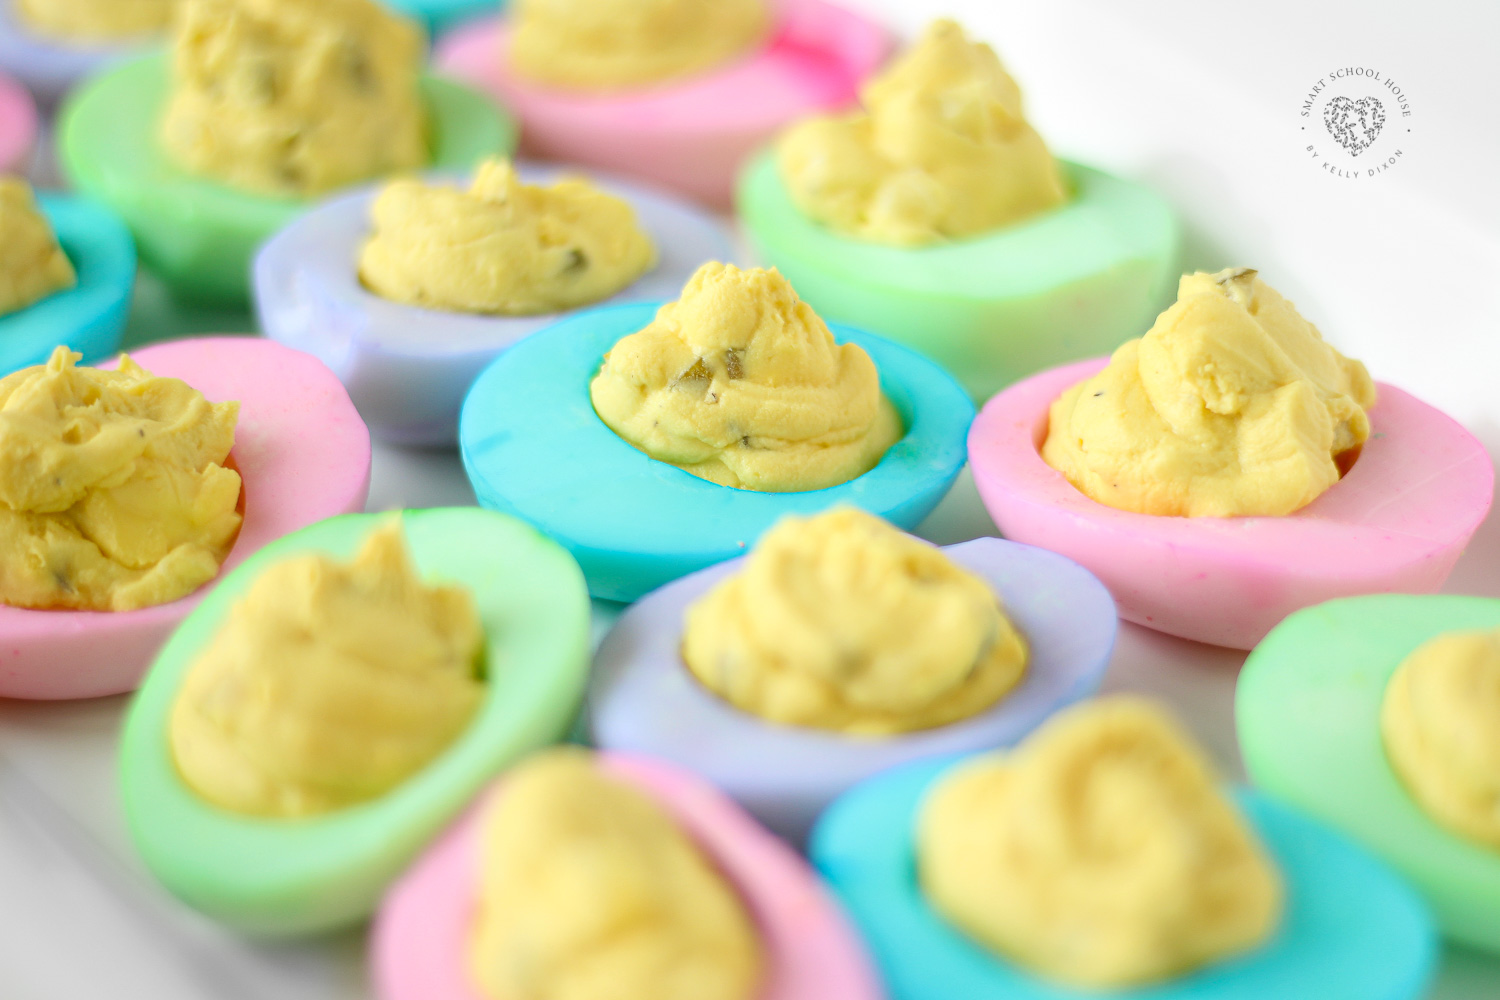 Colored Deviled Eggs are so beautiful! A very easy, special touch for Easter and fun to do at baby showers as well.